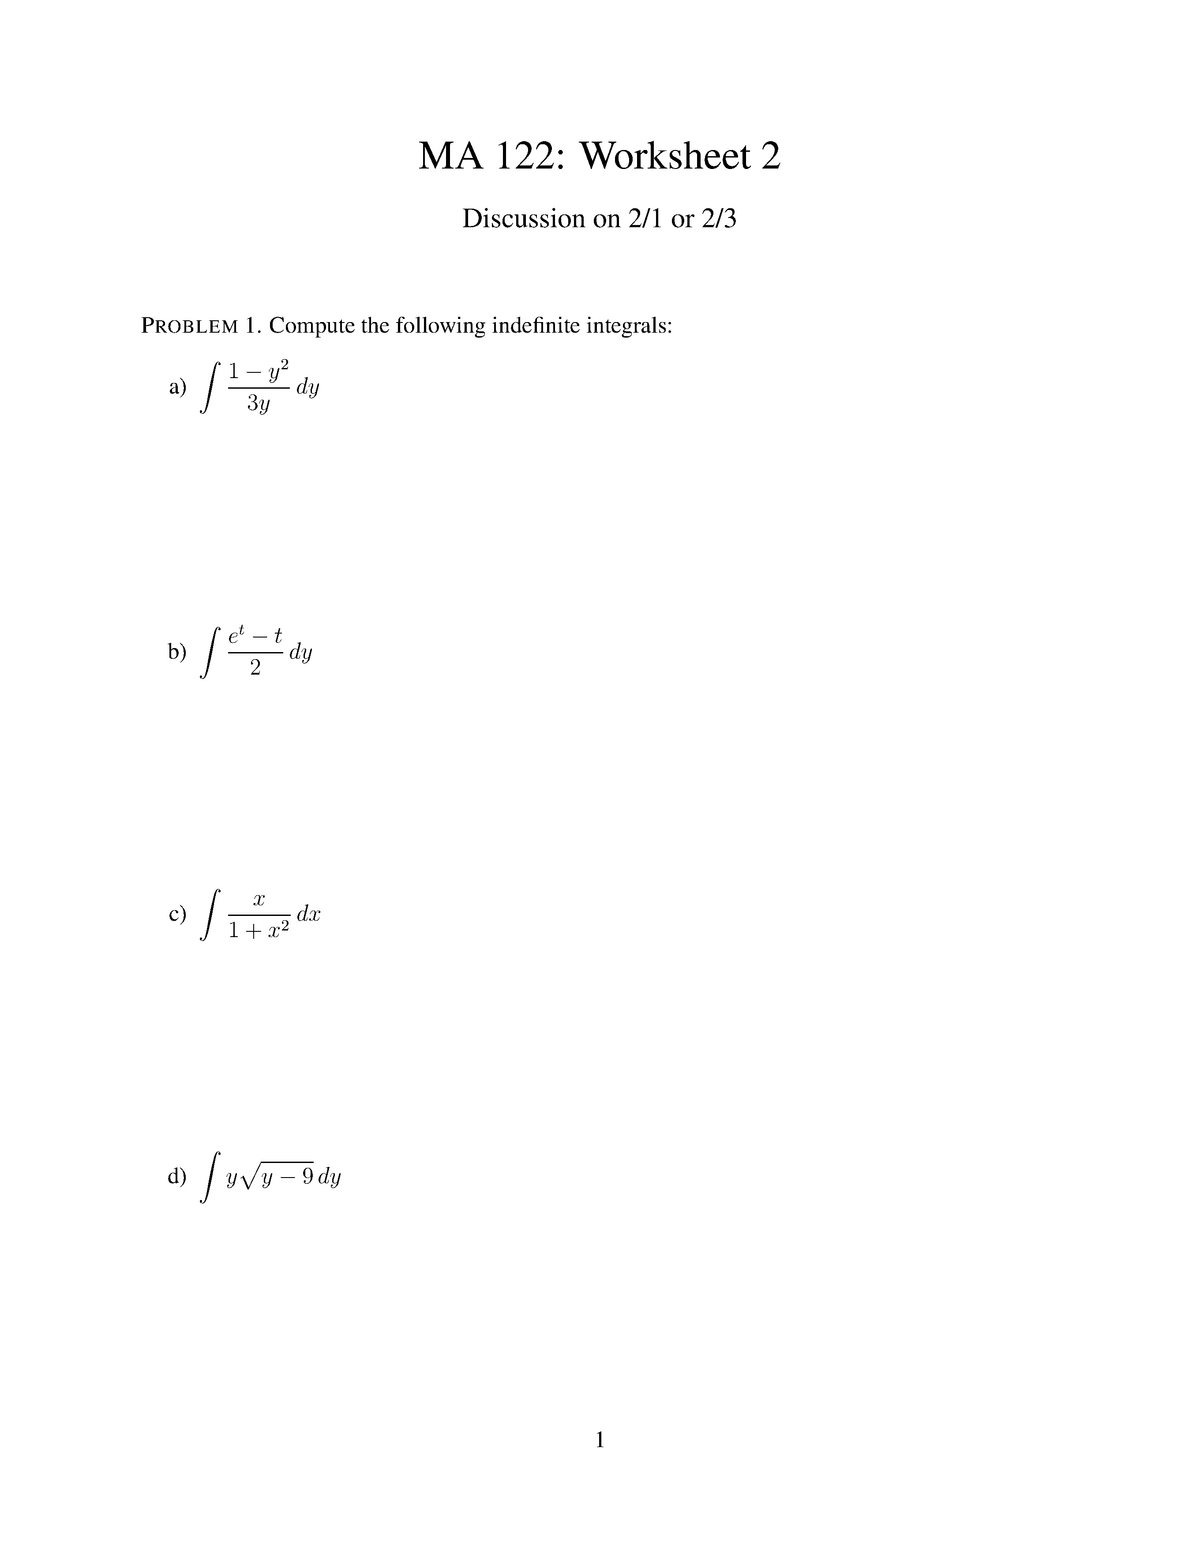 seminar-assignments-worksheet-2-with-solutions-ma-122-worksheet-2